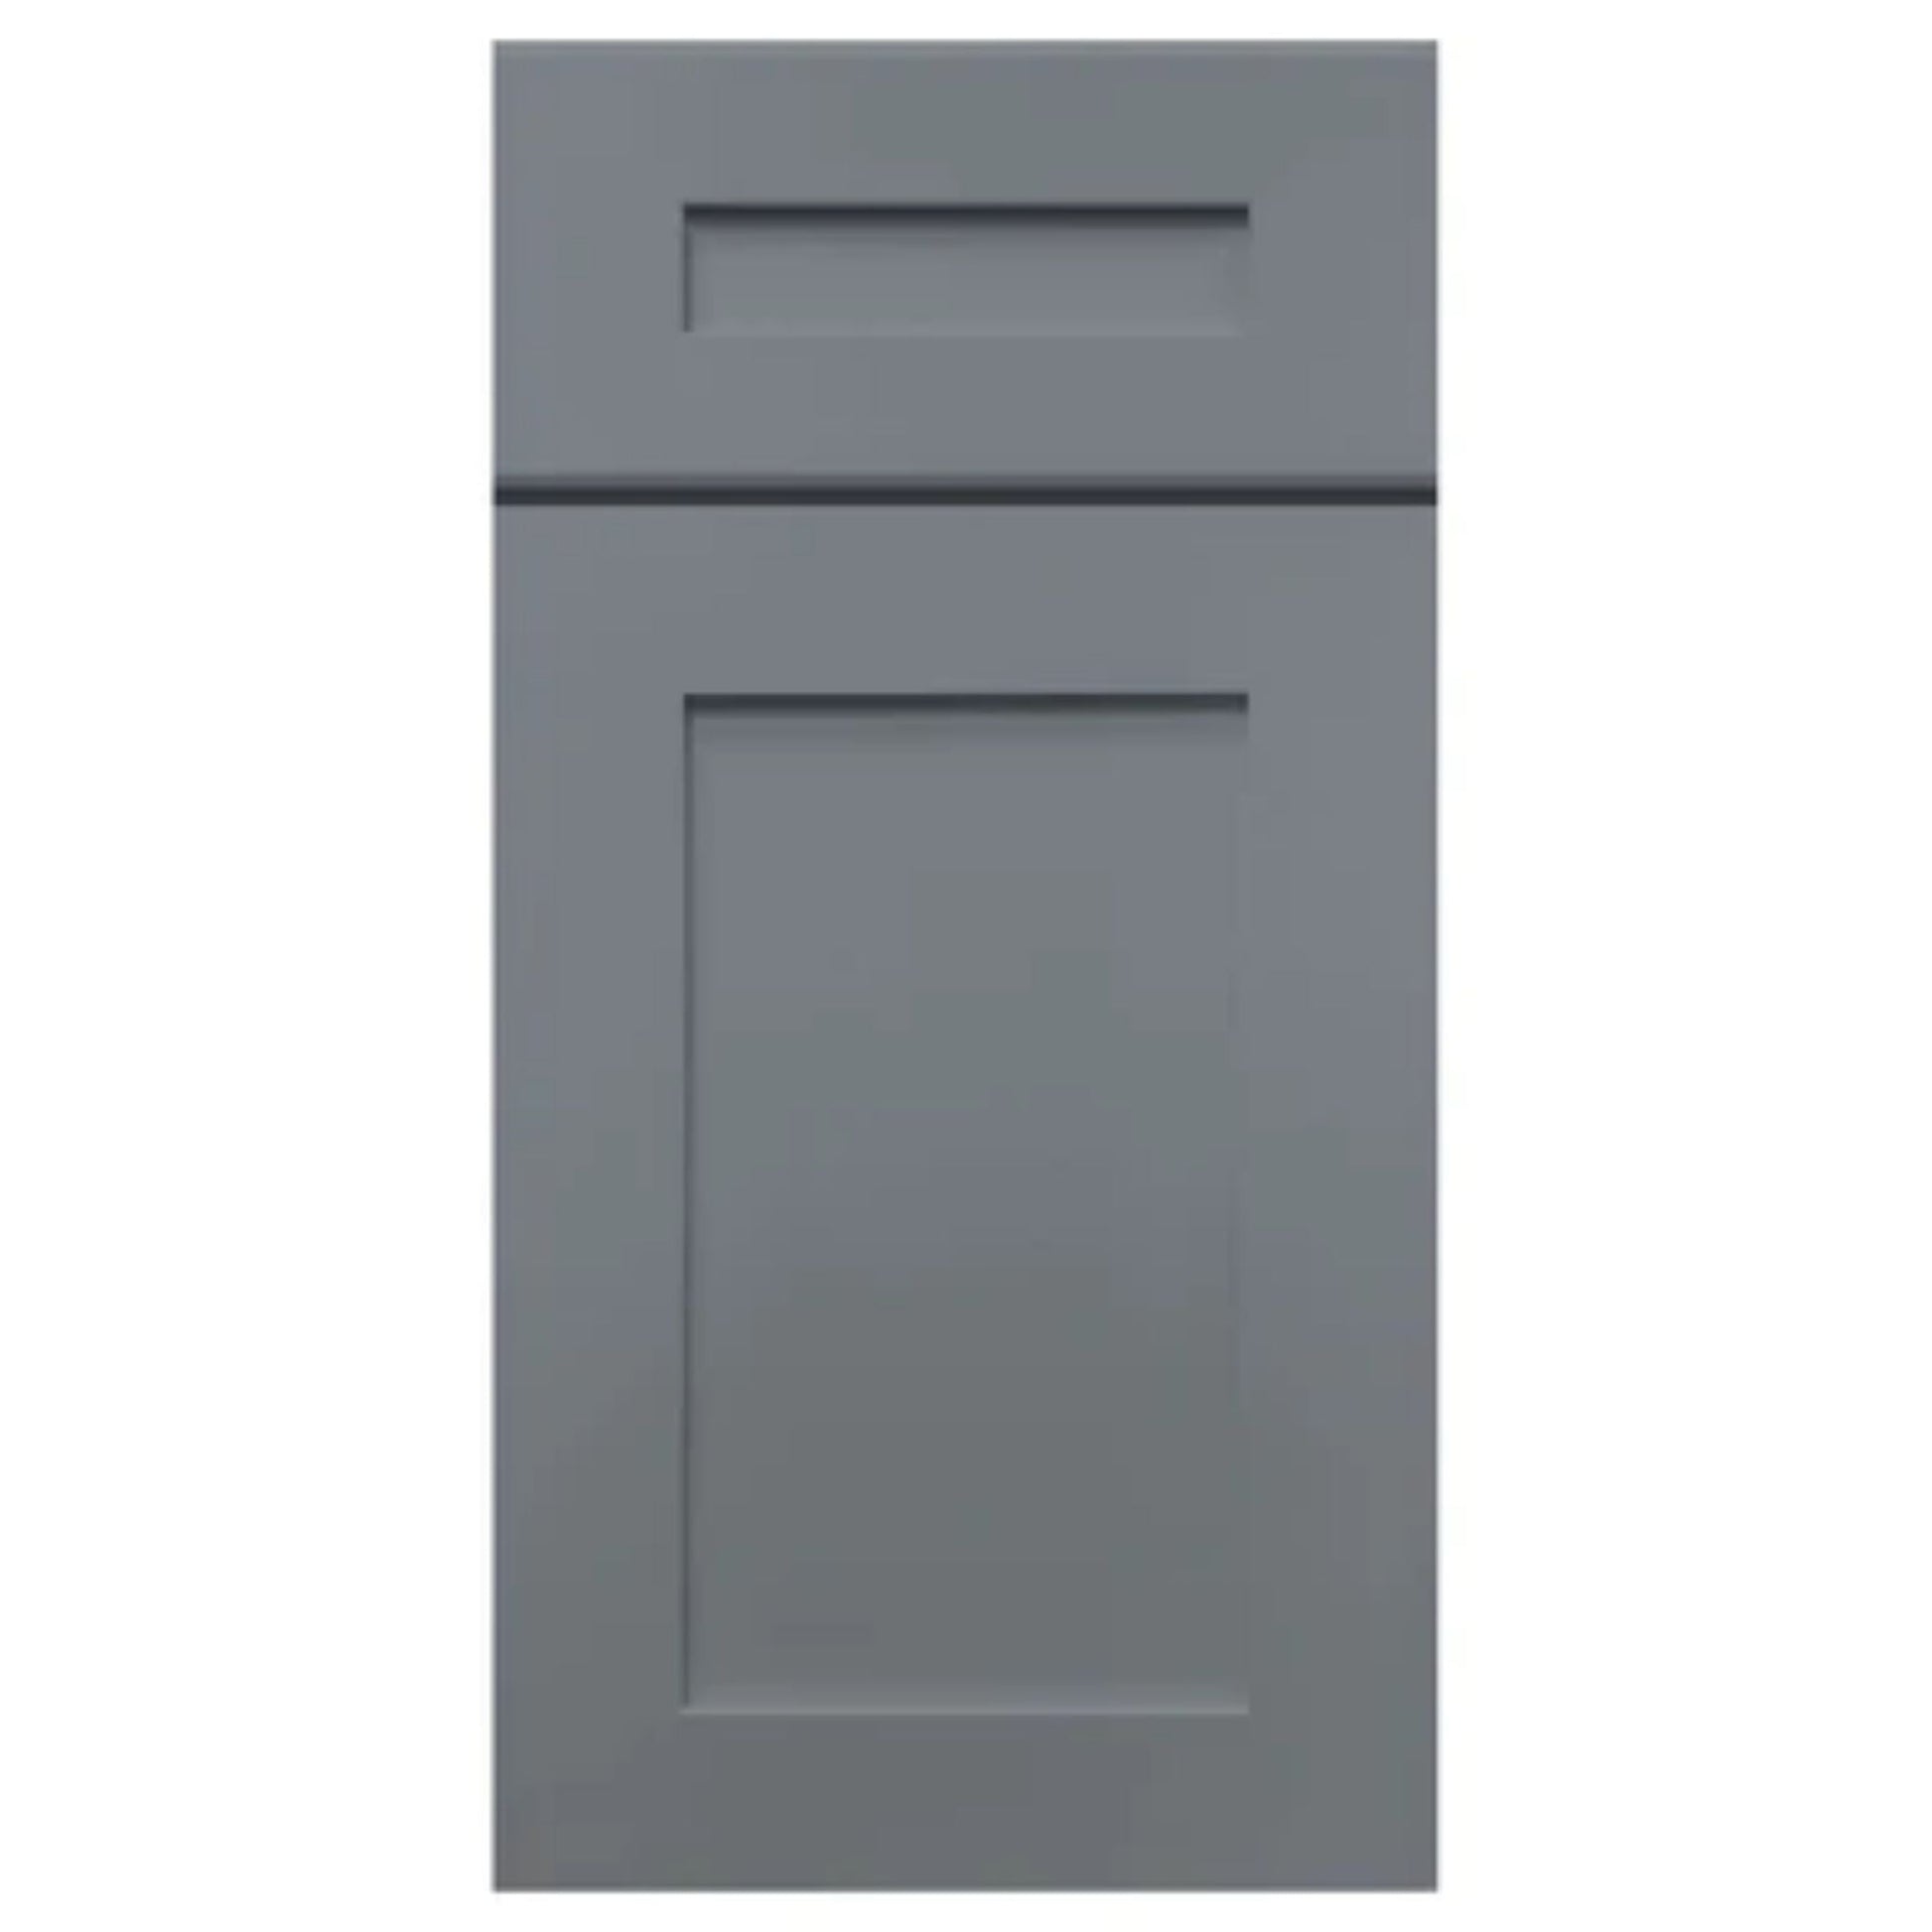 LessCare 24" x 42" x 12" Colonial Gray Wall Kitchen Cabinet - W2442